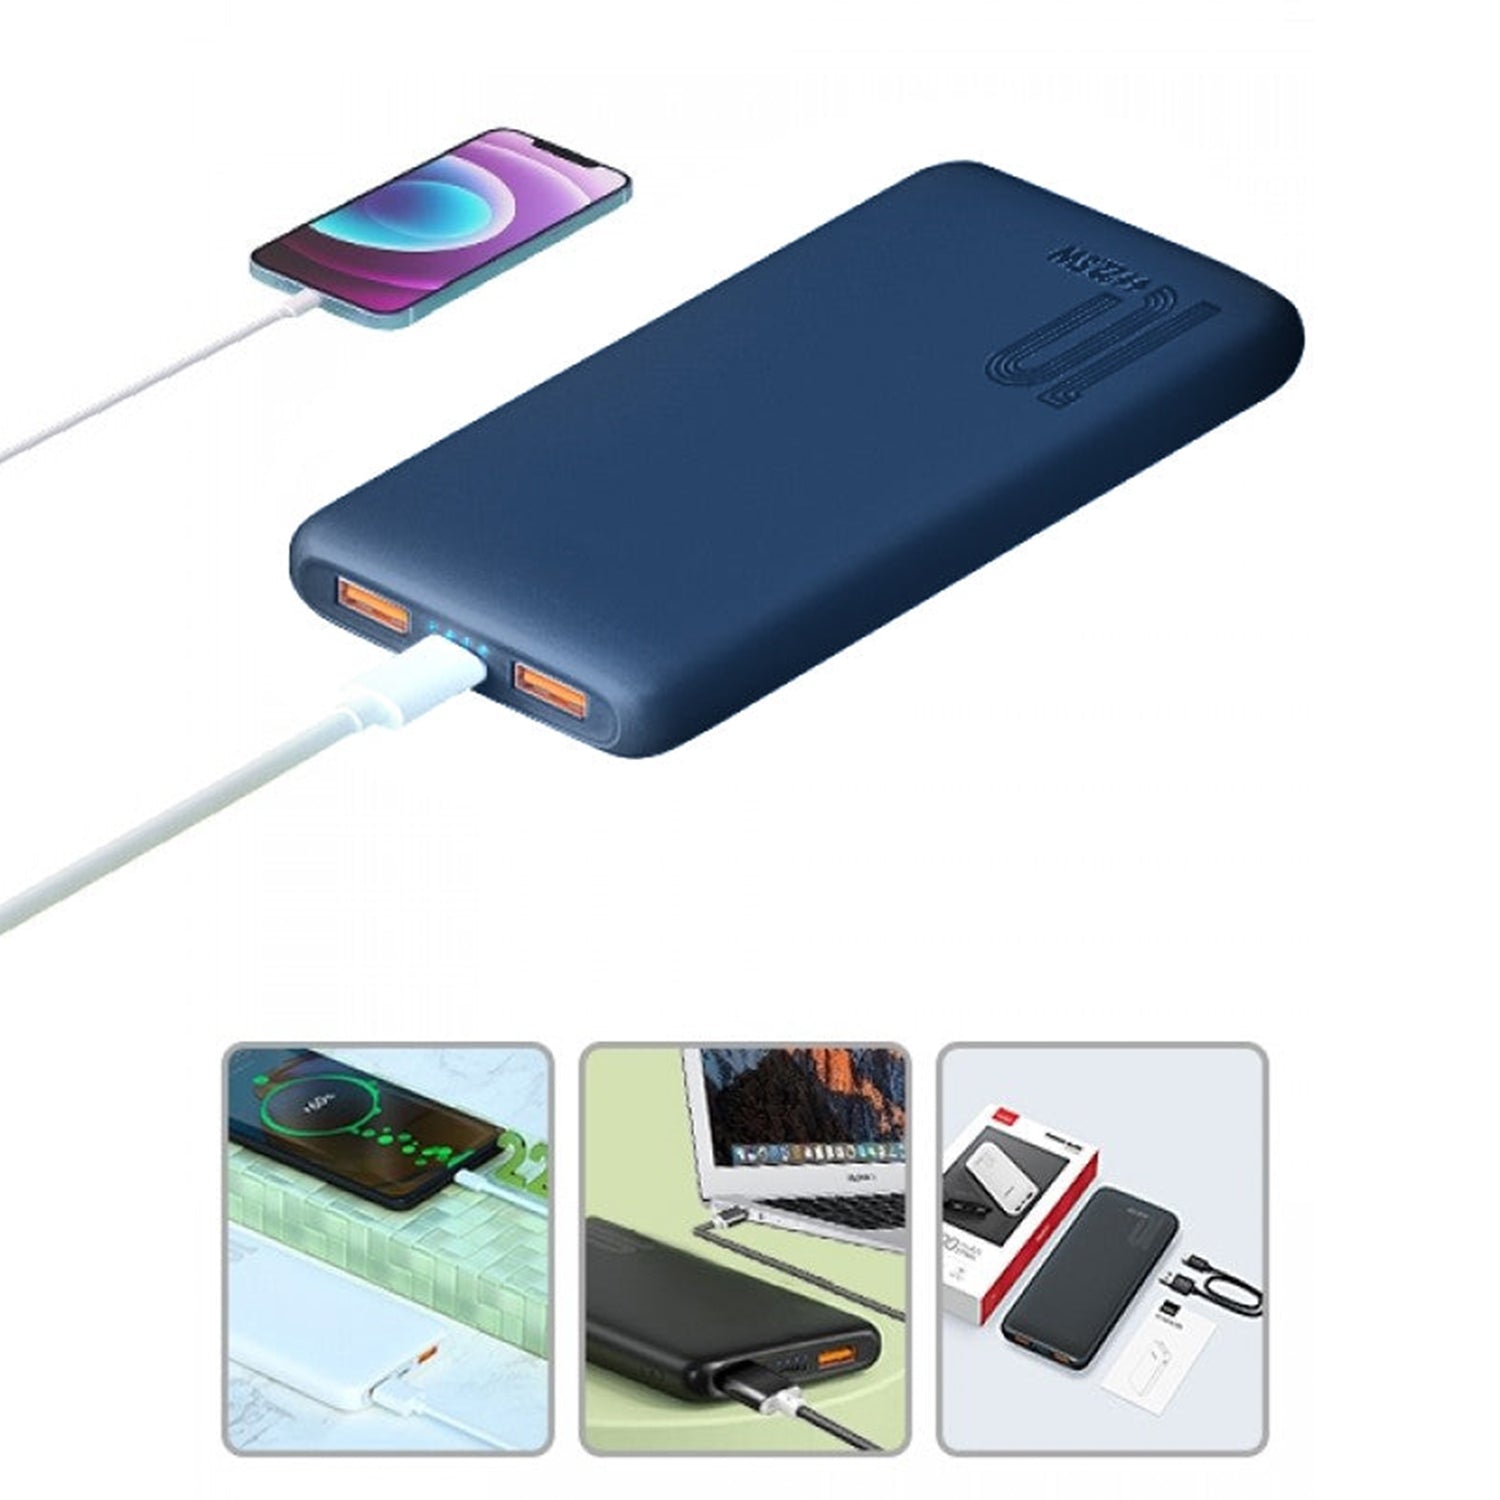 PD Power Bank 10000mAh QC3.0 Quick Charge For iPhone/Samsung/Huawei Powerbank